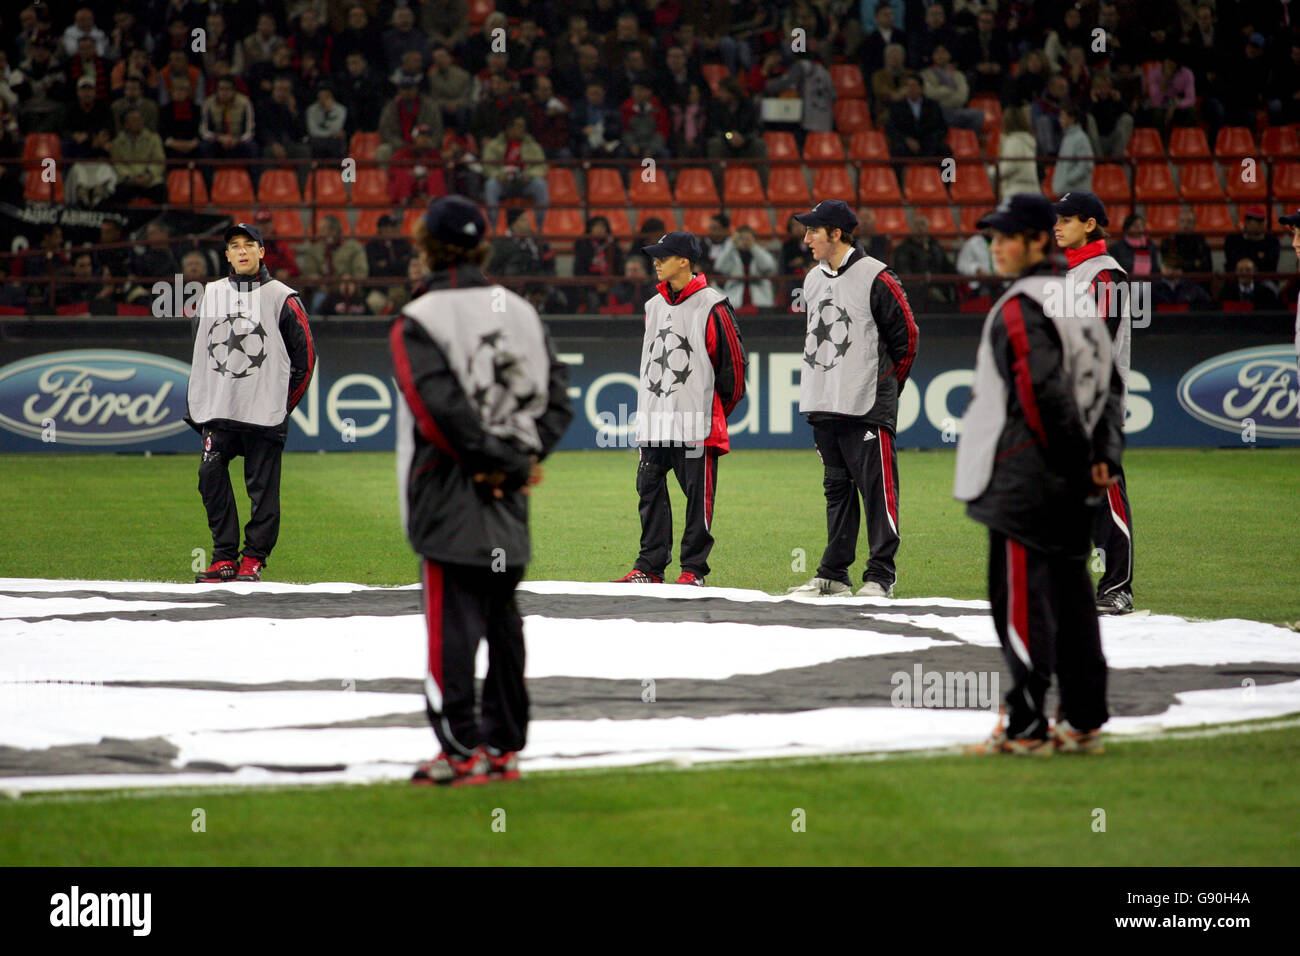 Football - UEFA Champions League - Groupe E - AC Milan / PSV Eindhoven - Giuseppe Meazza. Ballboys Banque D'Images